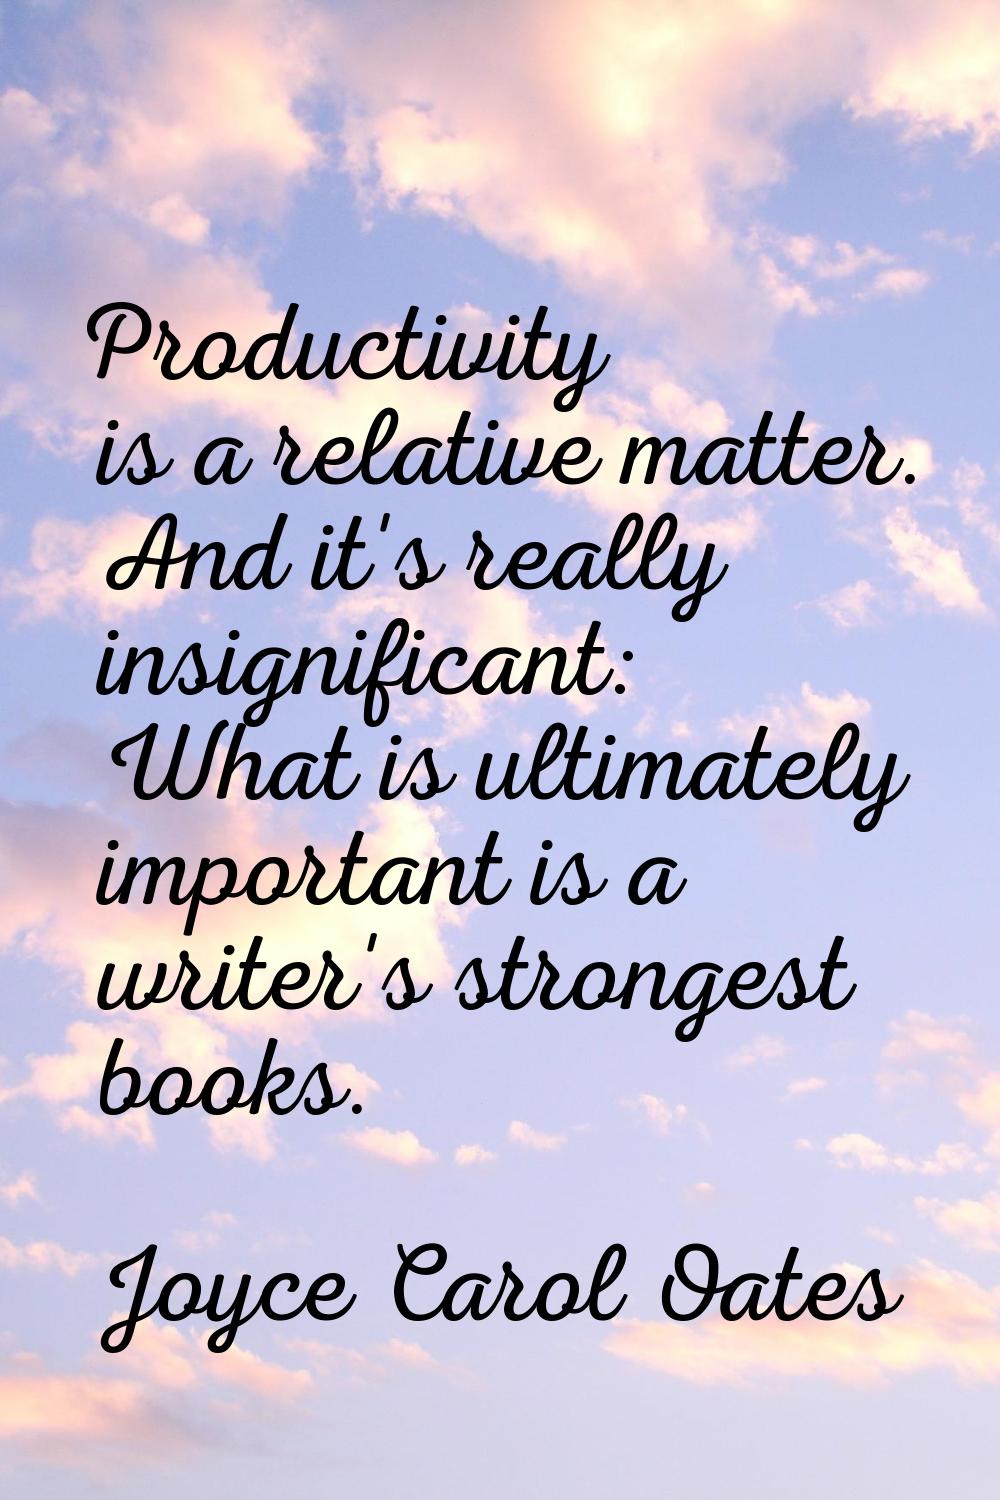 Productivity is a relative matter. And it's really insignificant: What is ultimately important is a